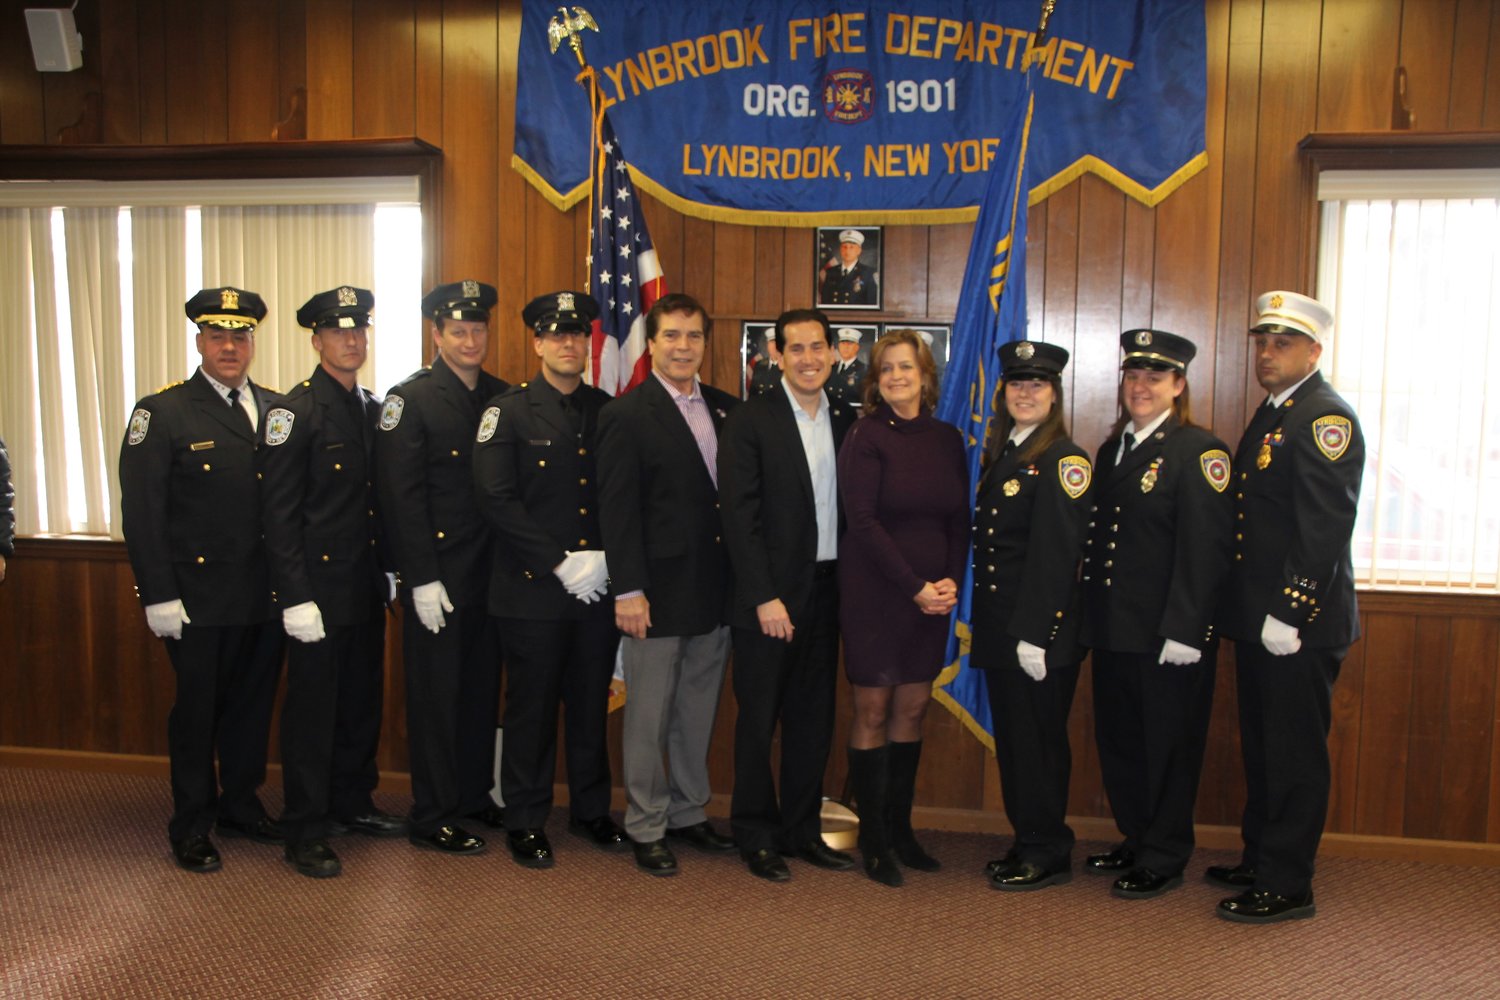 Lynbrook Police Chief Brian Paladino, far left, and Lynbrook Fire Chief Nick Pearsall, far right, joined their department members, Beach, Kaminsky and Griffin during the presentations.